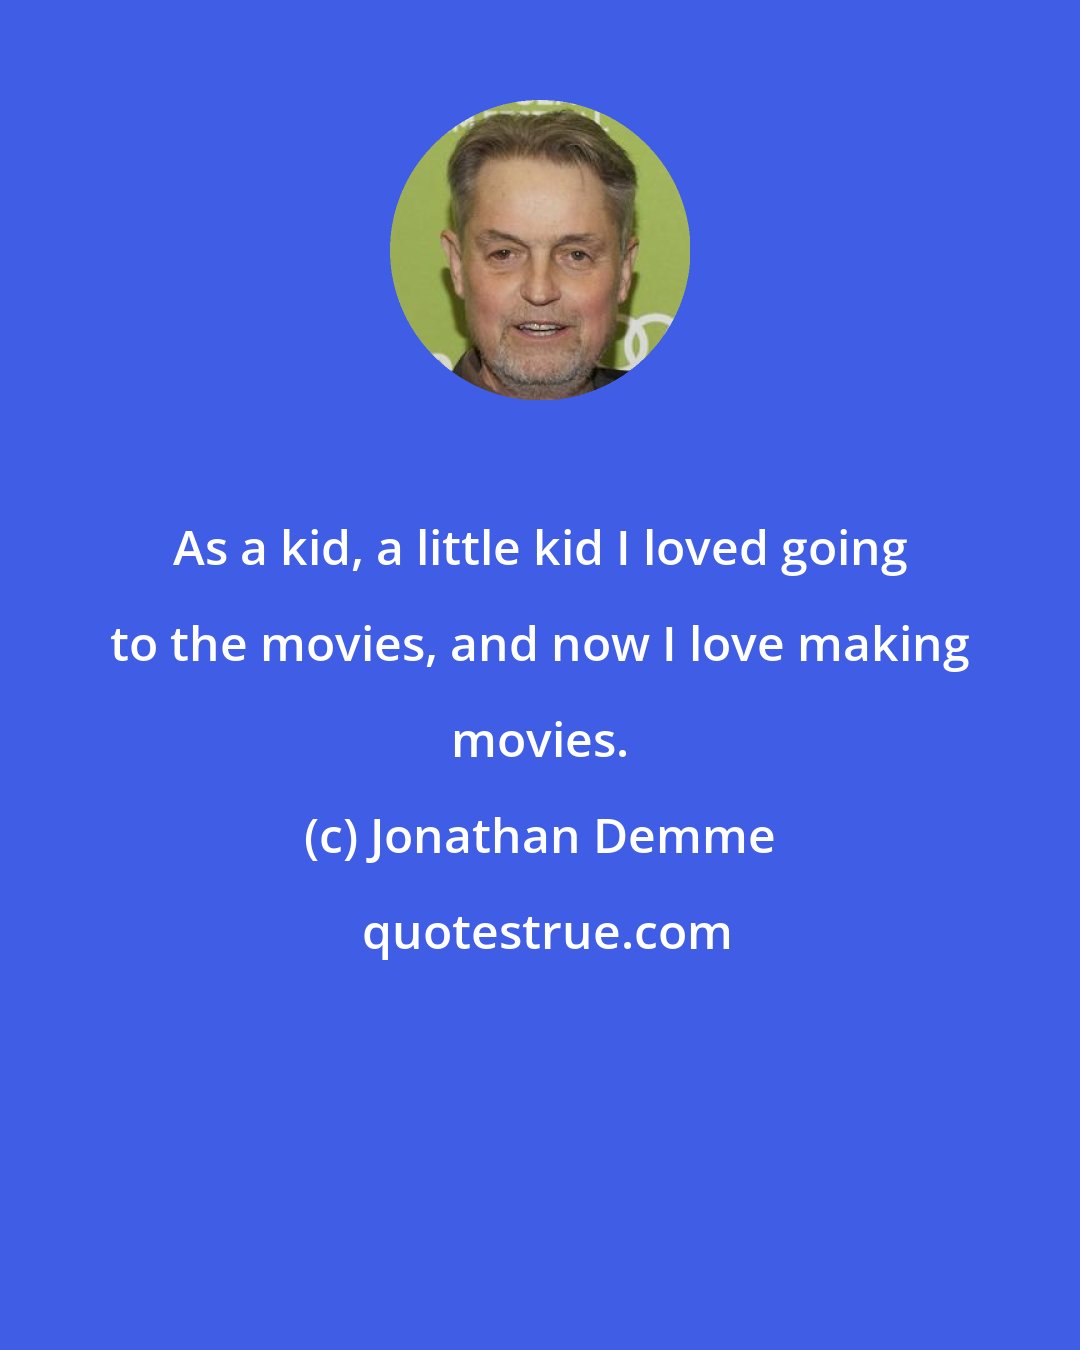 Jonathan Demme: As a kid, a little kid I loved going to the movies, and now I love making movies.